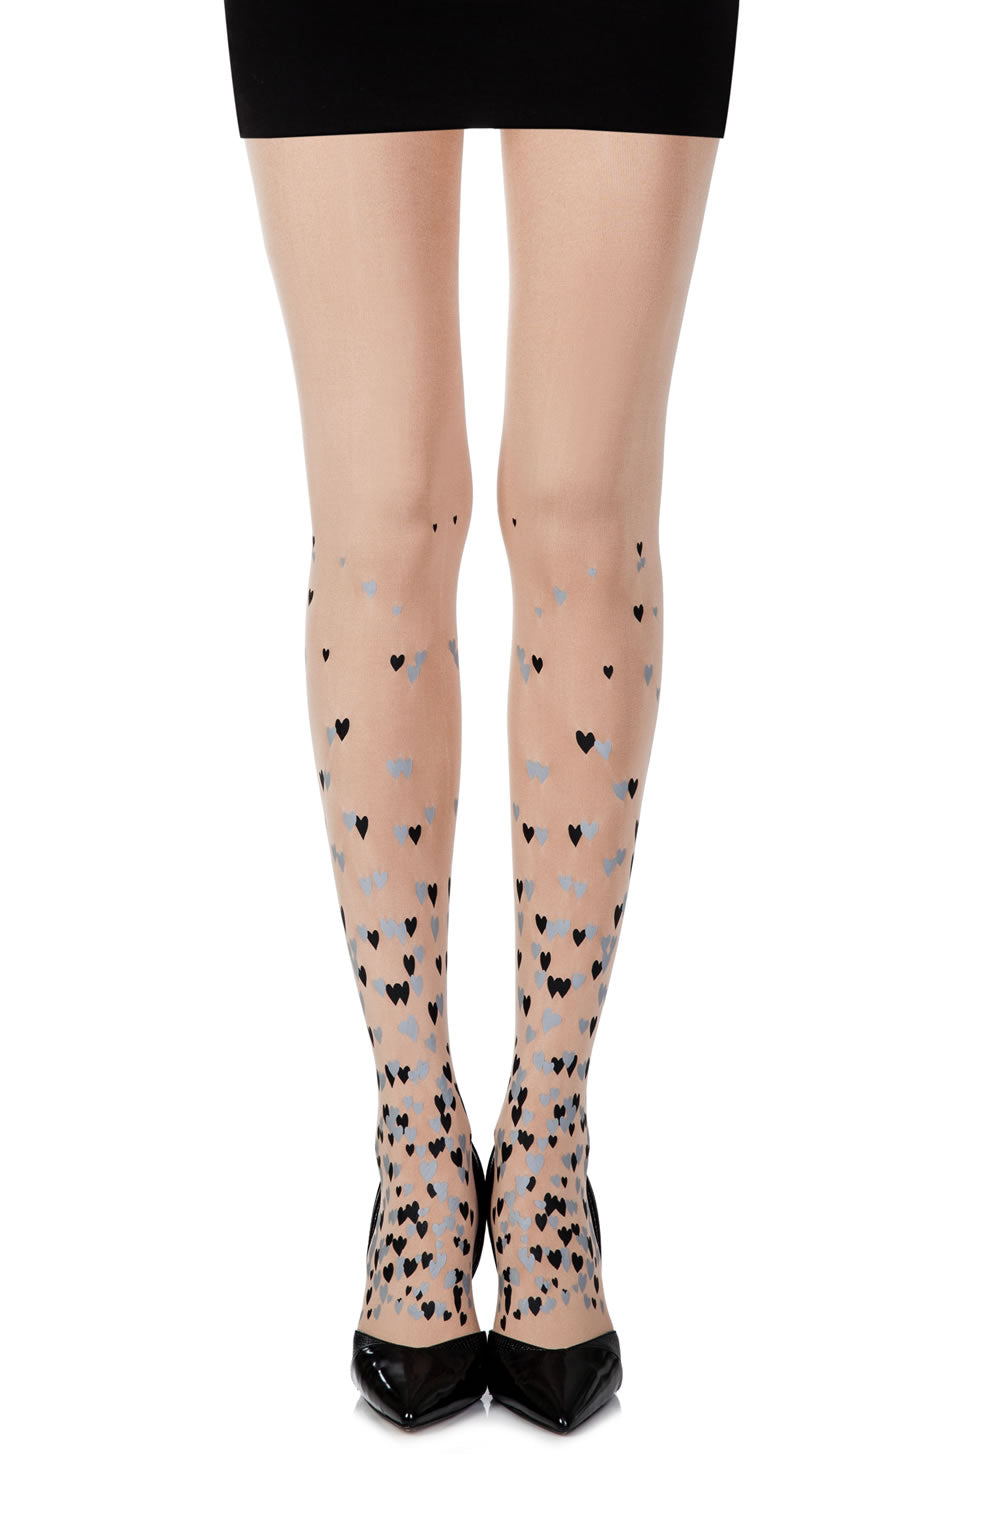 Zohara “Queen Of Hearts” Powder Print Tights  Hosiery, NEWLY-IMPORTED, Tights, Zohara - So Luxe Lingerie